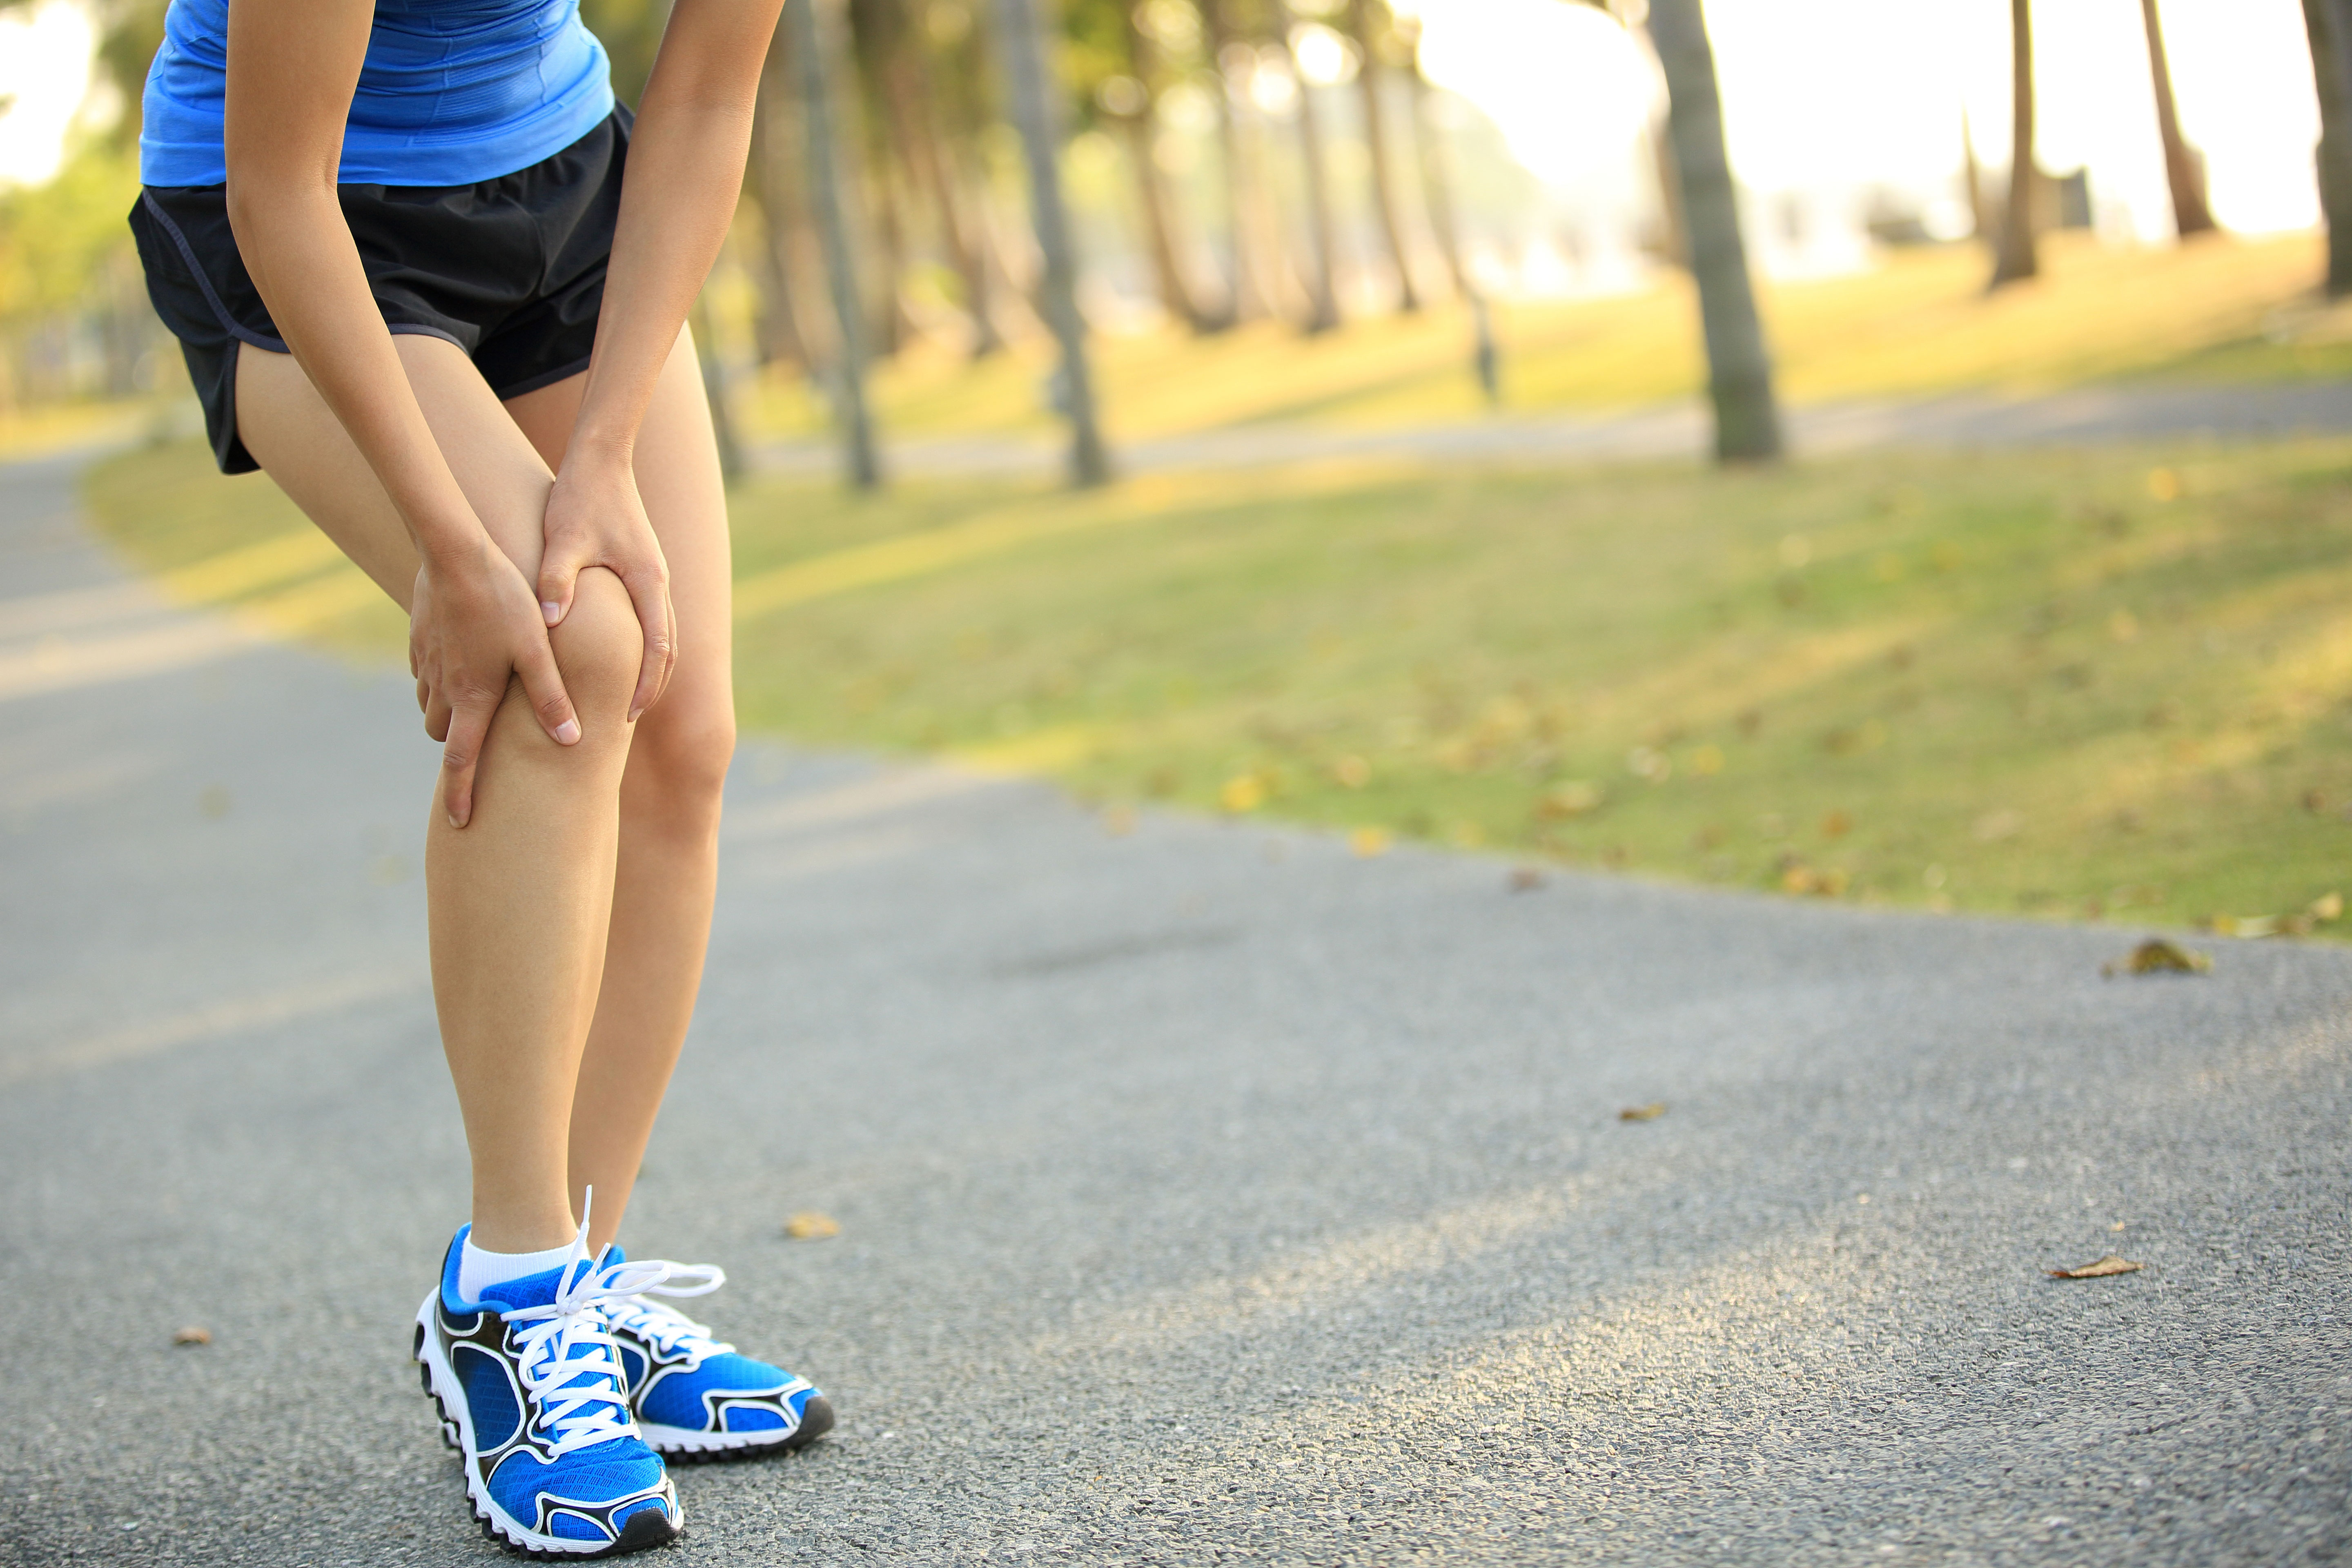 6 Treatment Options for Knee Pain